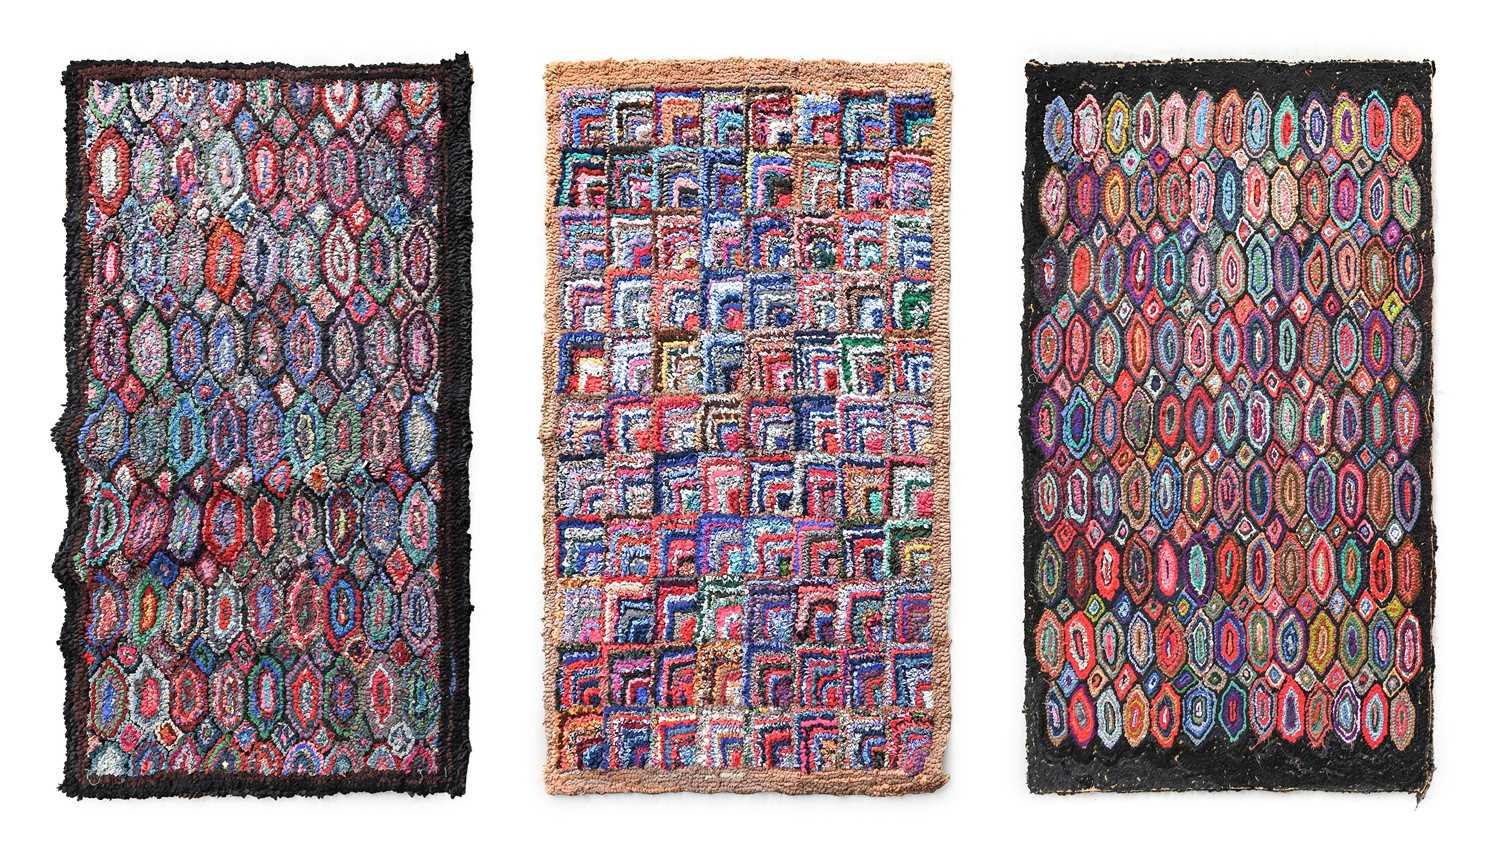 Mollie Turner (1918-2010) (Scruton, North Yorkshire): A Rag Rug, c.1990s, repeating pattern, multi